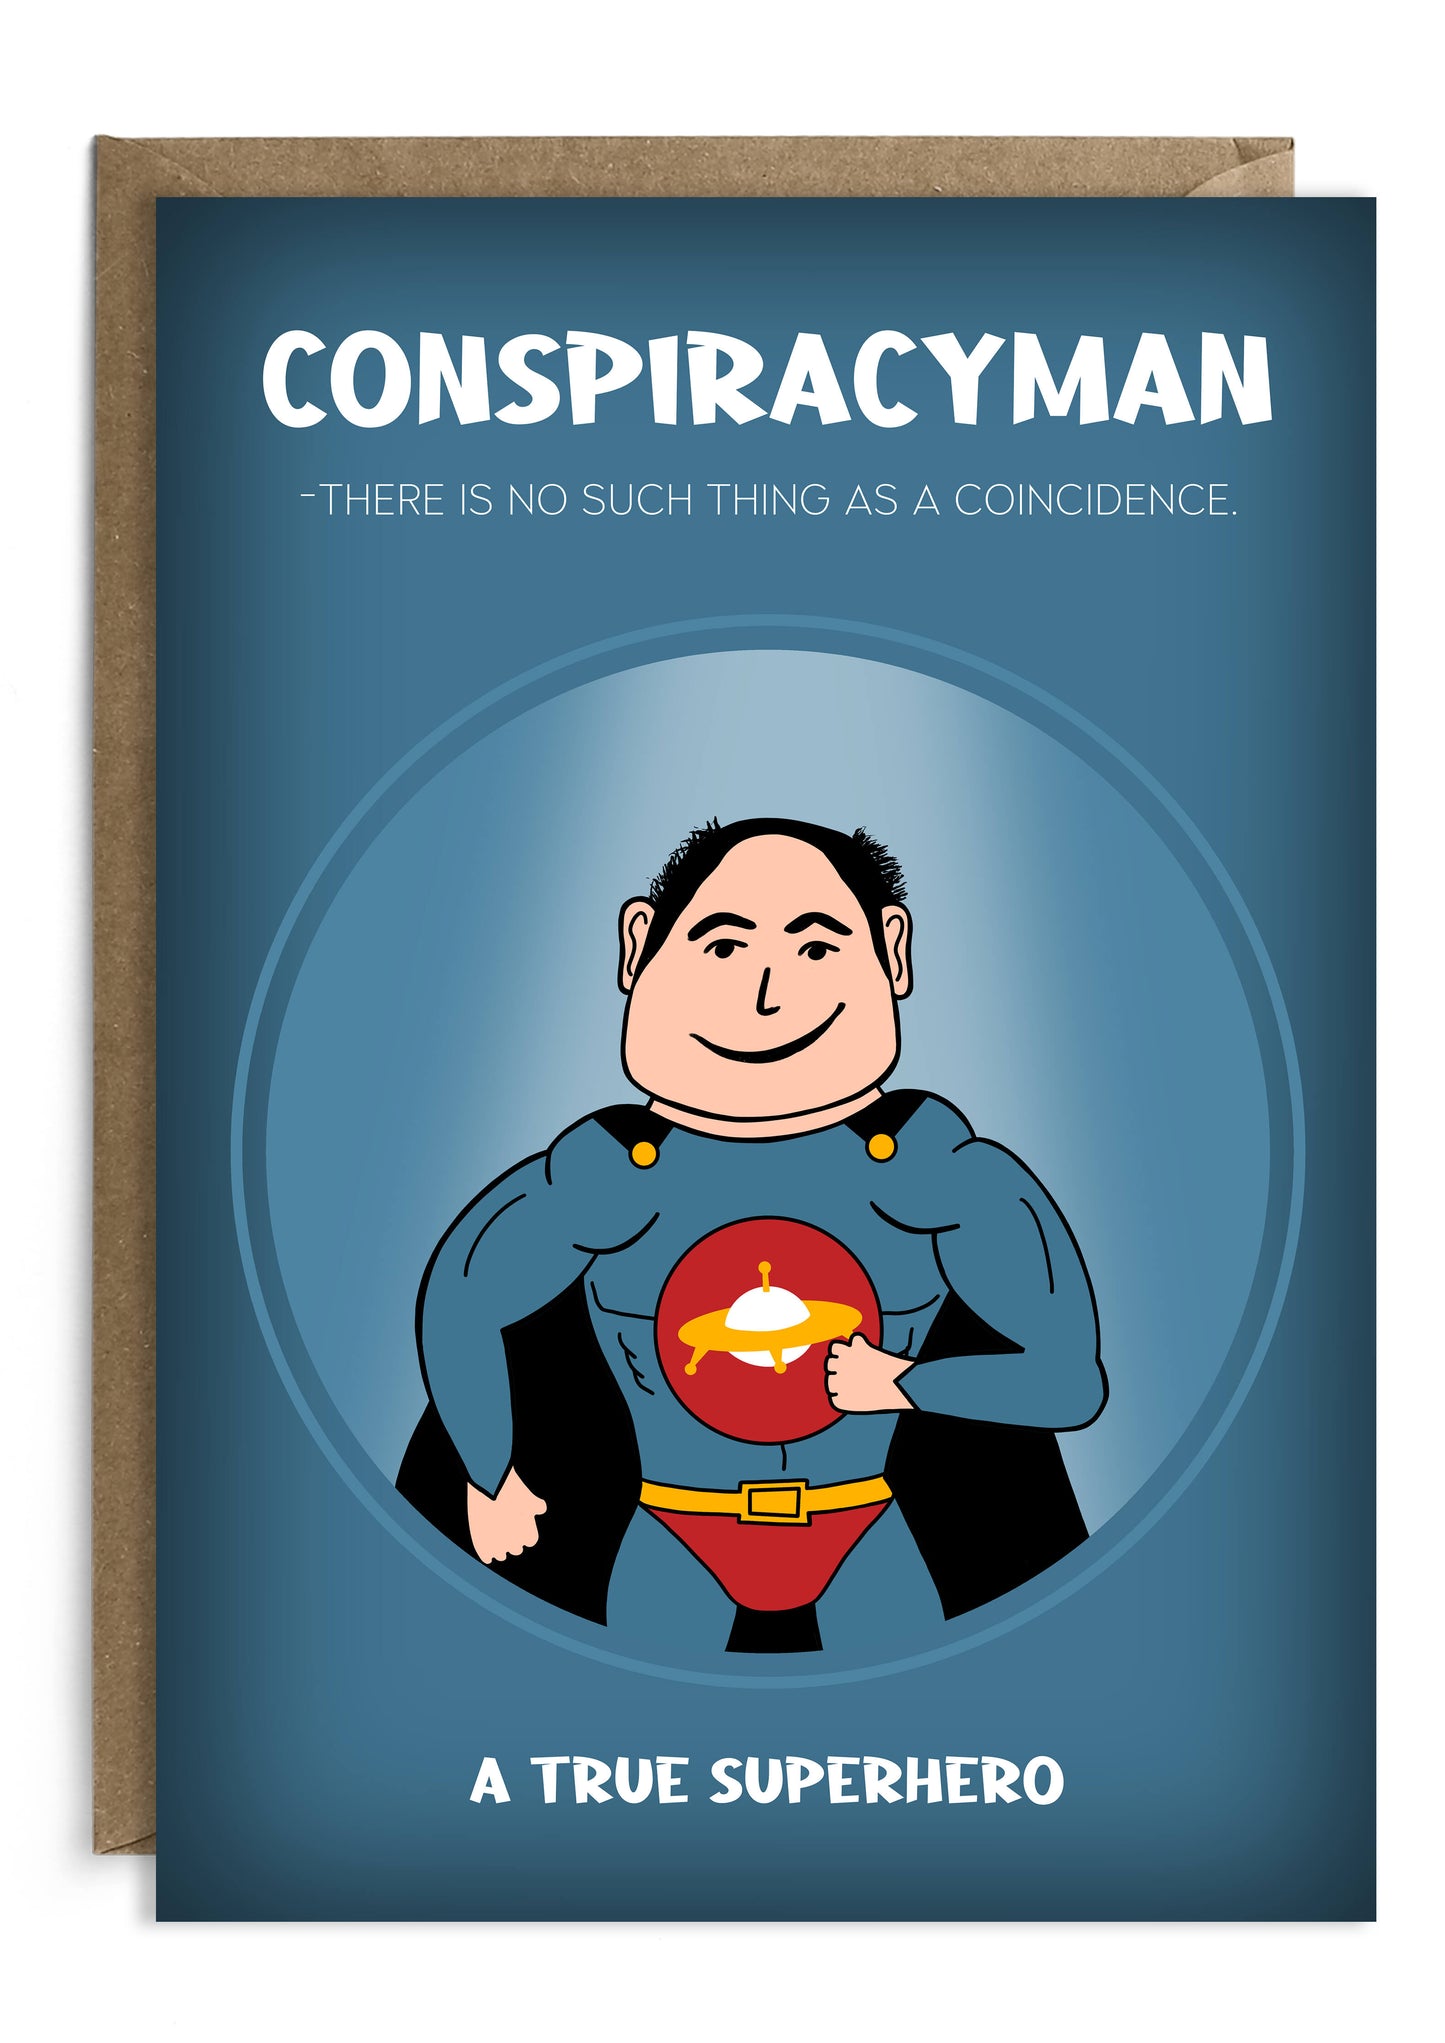 Funny Father's Day Card - Conspiracyman - For Superhero Dads Who Don't Believe In Coincidences